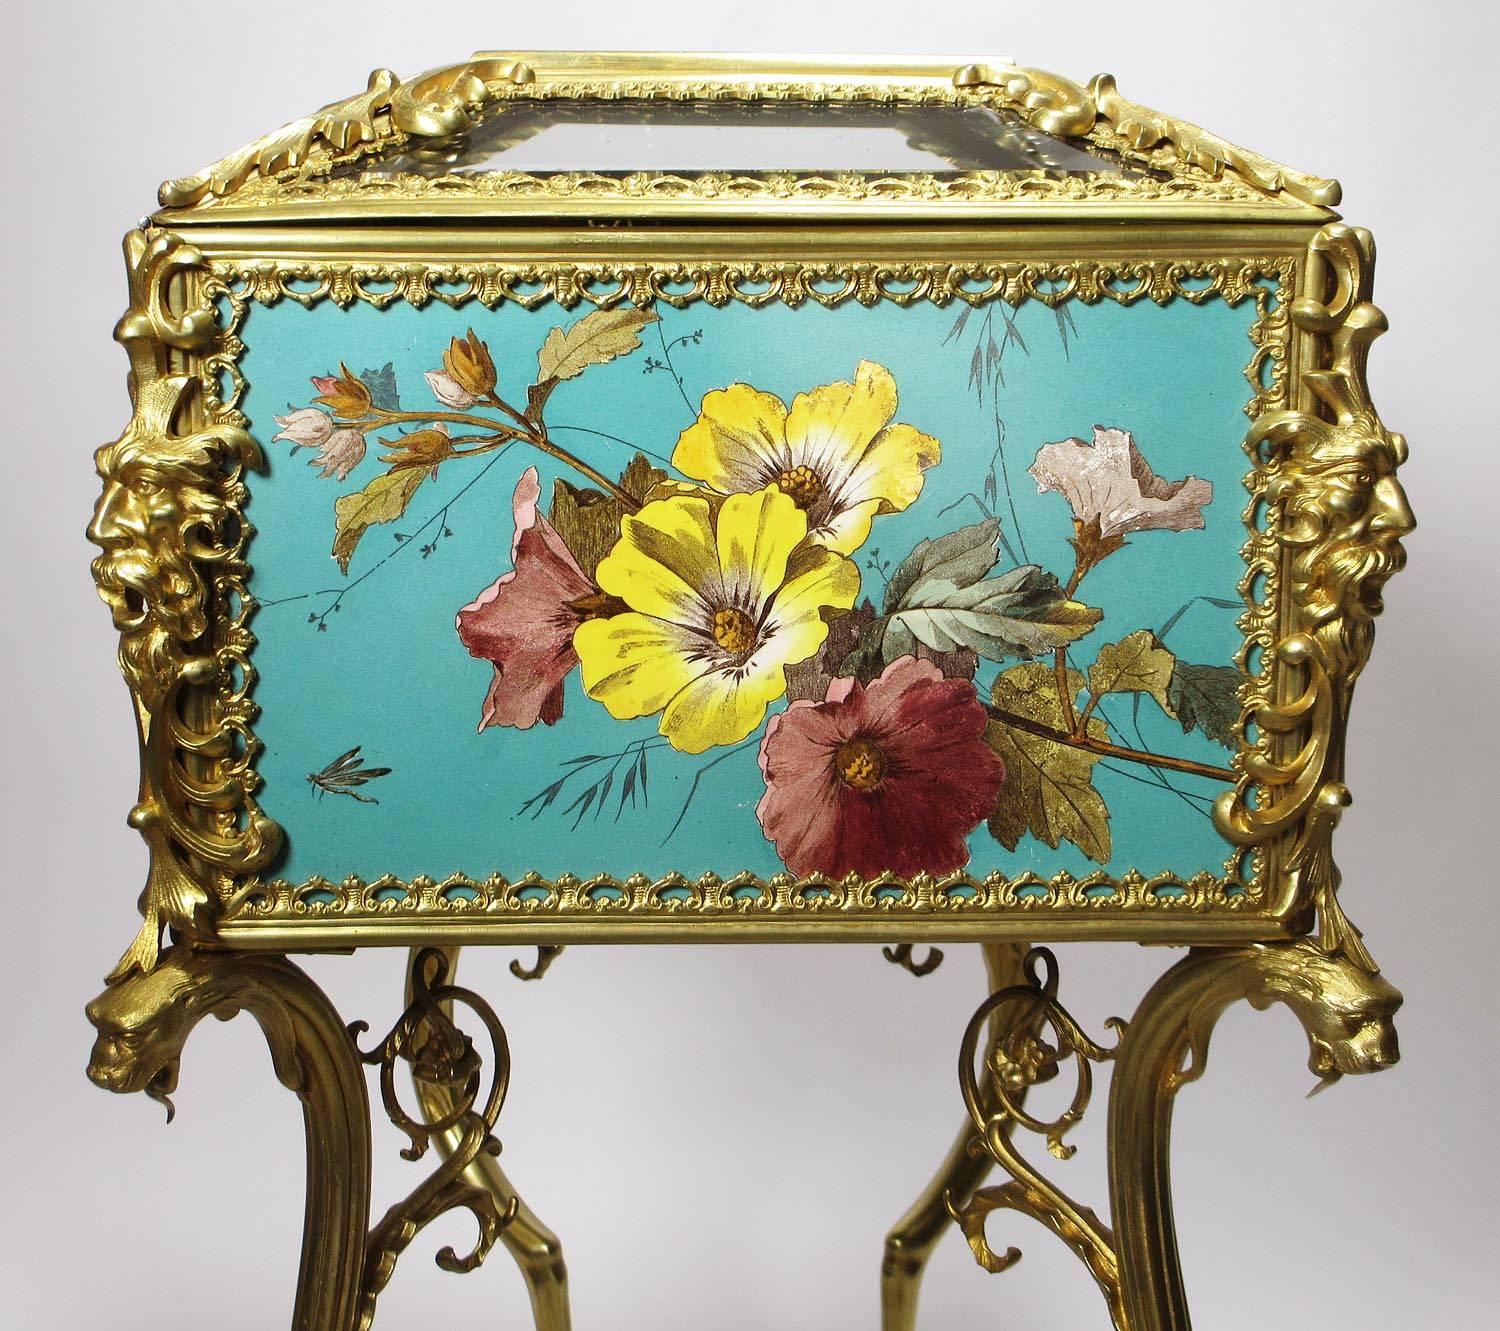 Beveled Superb Early 20th Century Aesthetic Movement Majolica & Gilt-Metal Jewelry Box